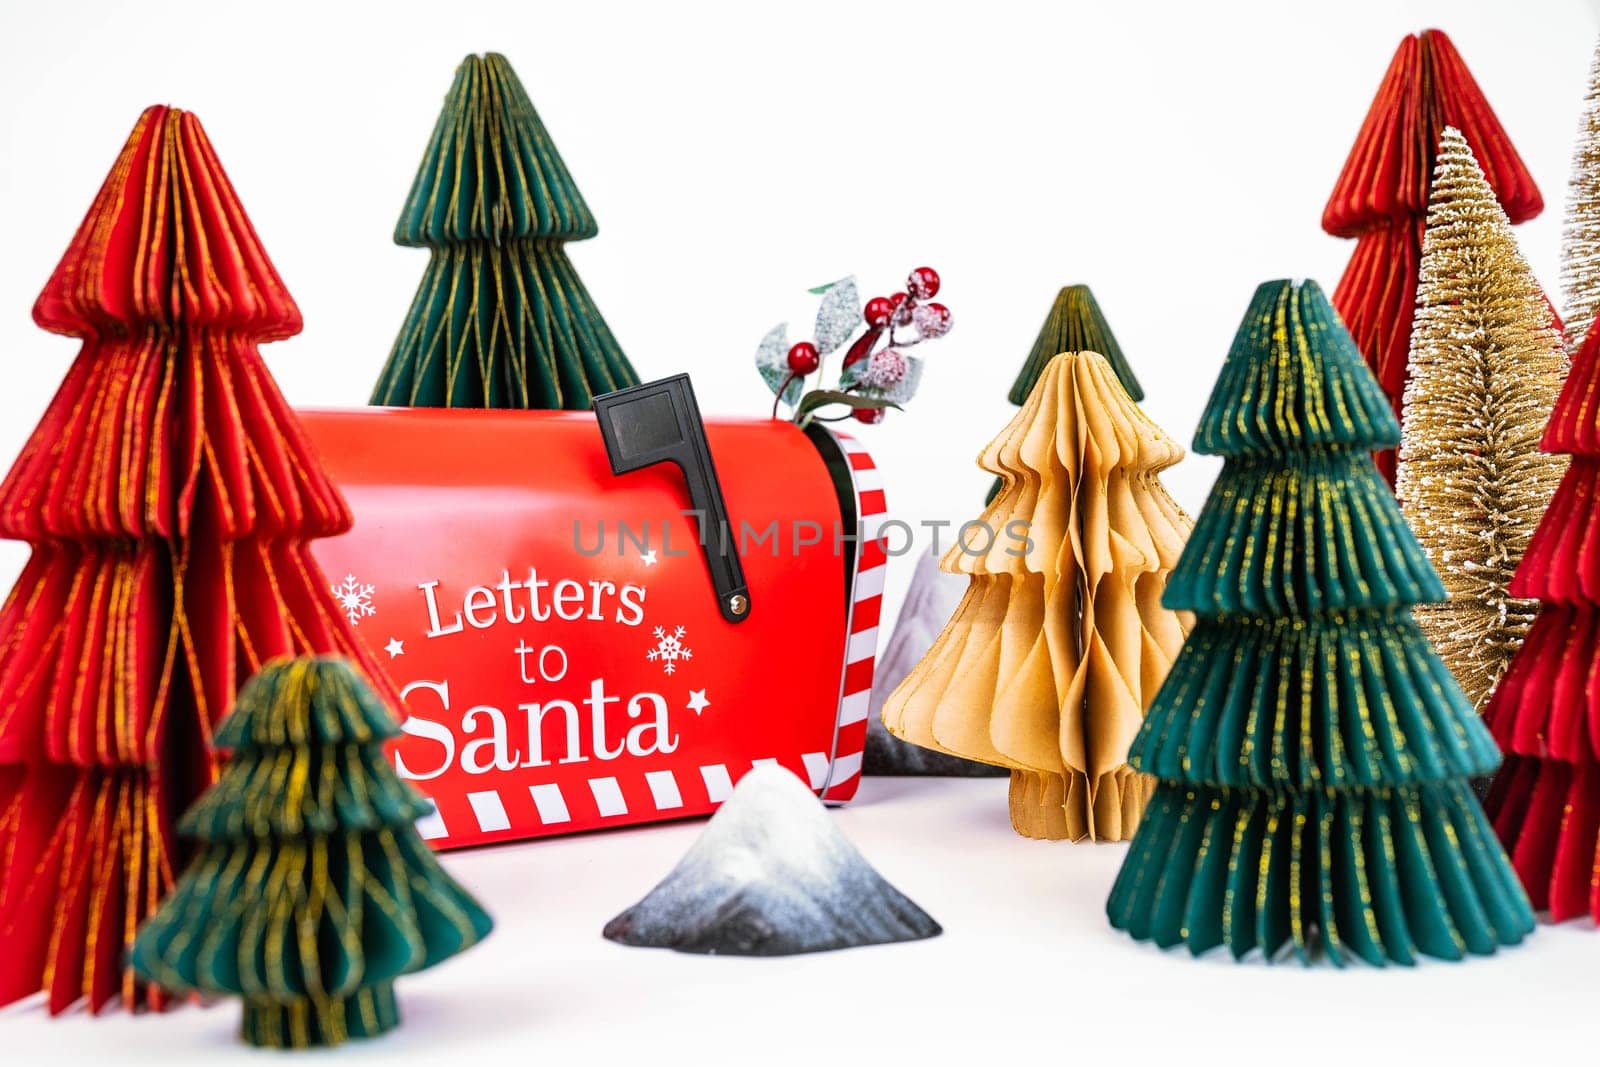 New Year's background for a product or card. Colored Christmas trees, Santa Claus mailbox. High quality photo